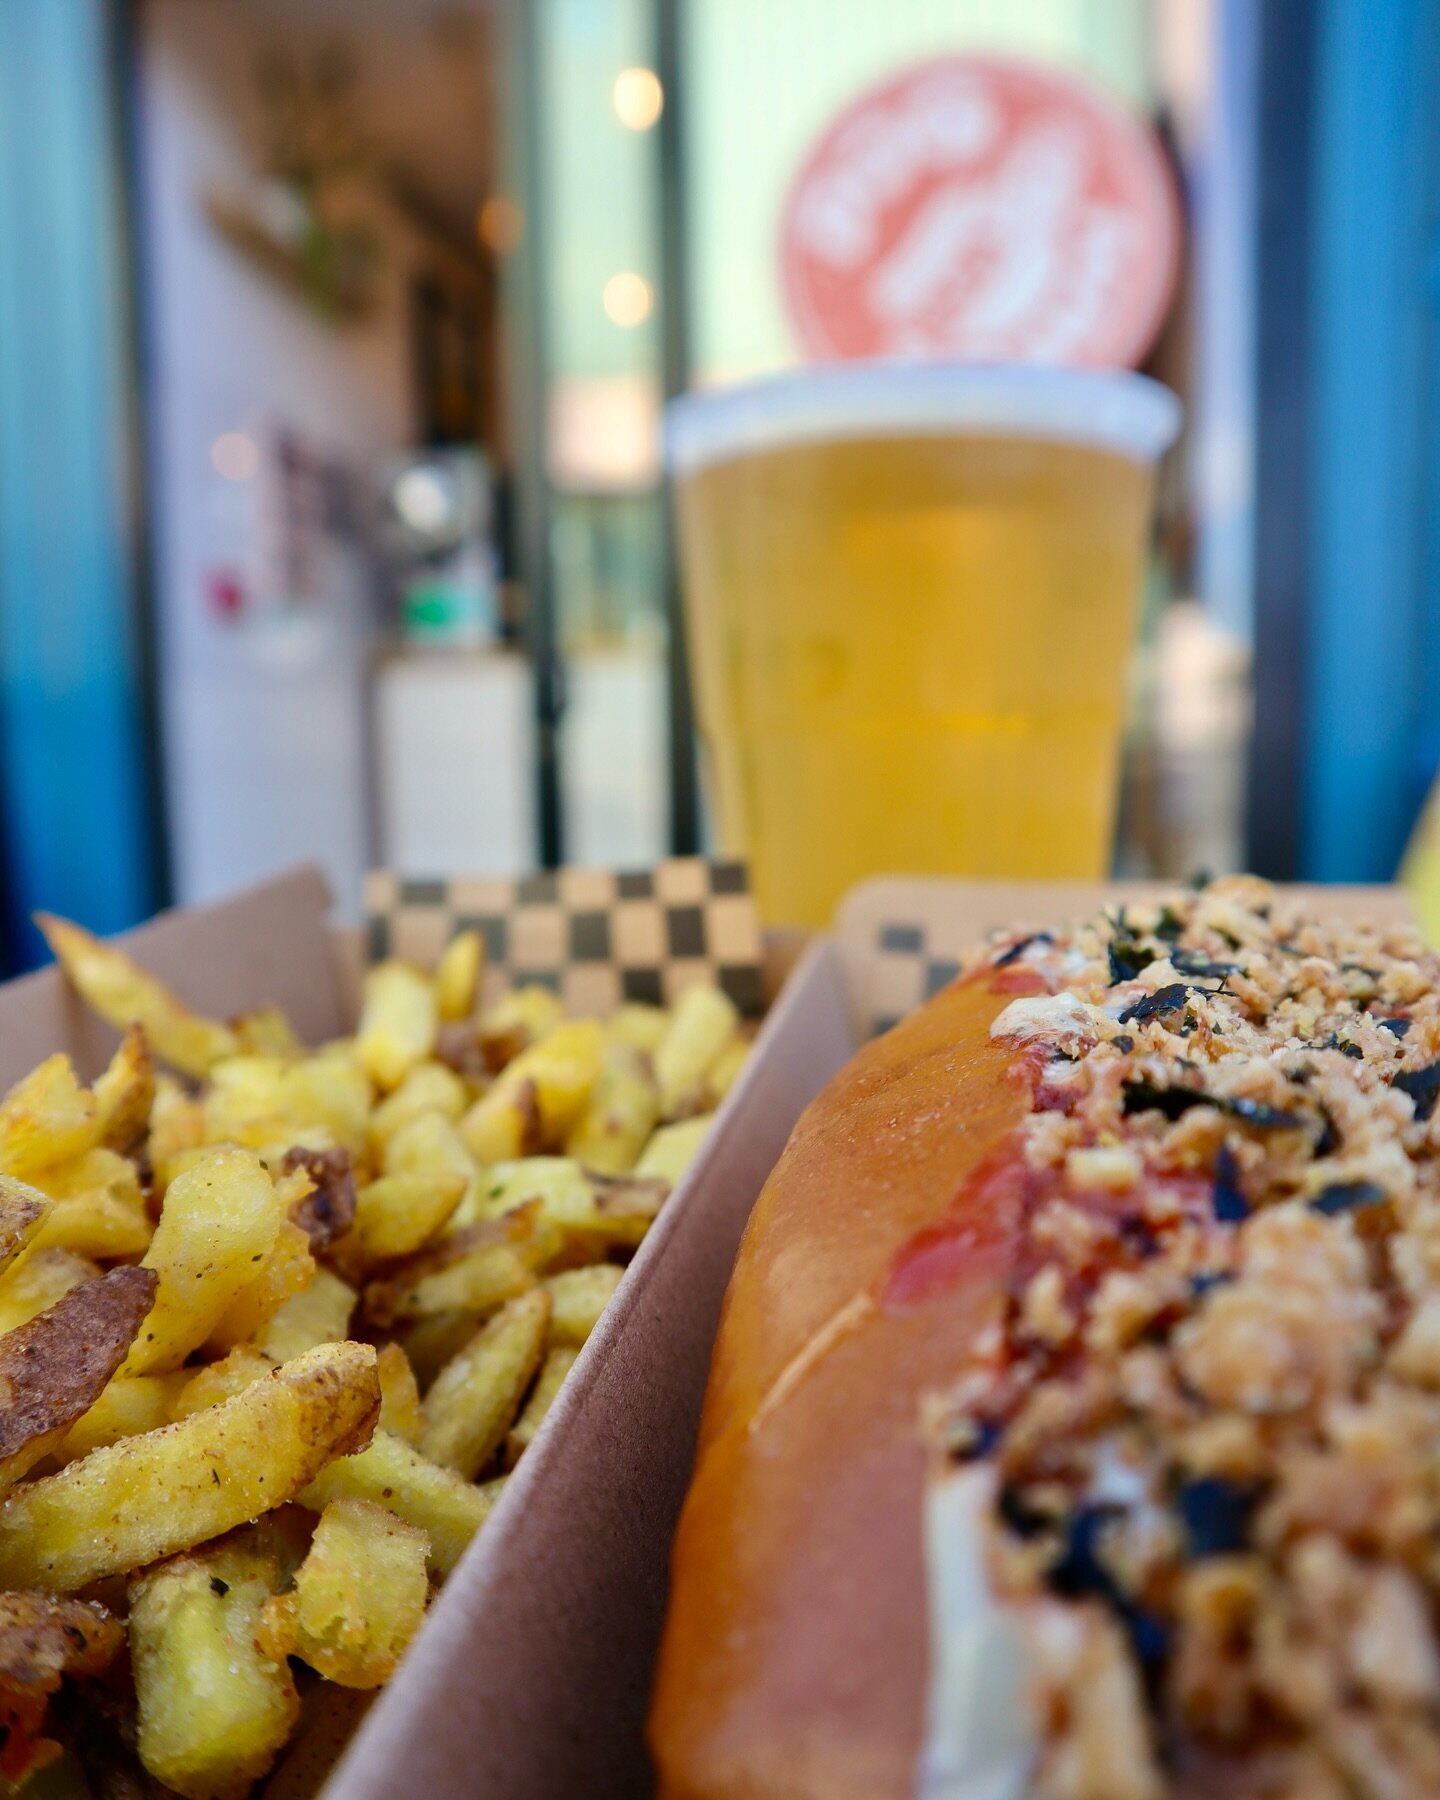 The perfect lunch combination for a late November Saturday! (Soft drinks available too) 🌭 🍟 🍺 
.
.
.
.
.
.
.
.
#hotdog #fries #beer #beerstagram #bristoleats #bristolife #bristollunch #grabandgo #lostandgrounded #kellerpils #mealdeal #ukstreetfood